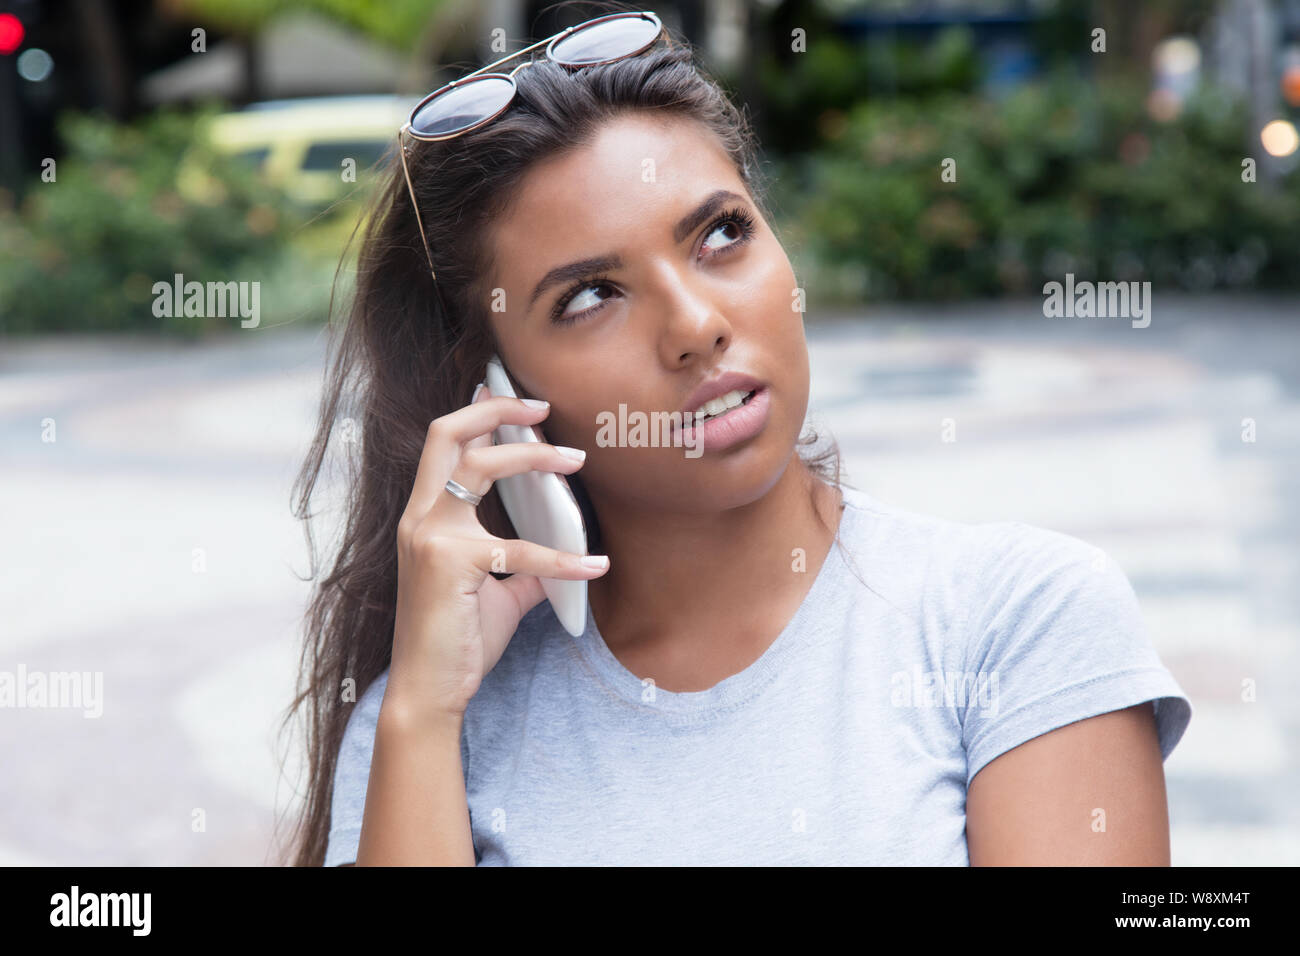 Latin female teenager listening at smart phone outdoor in the summer in the city Stock Photo